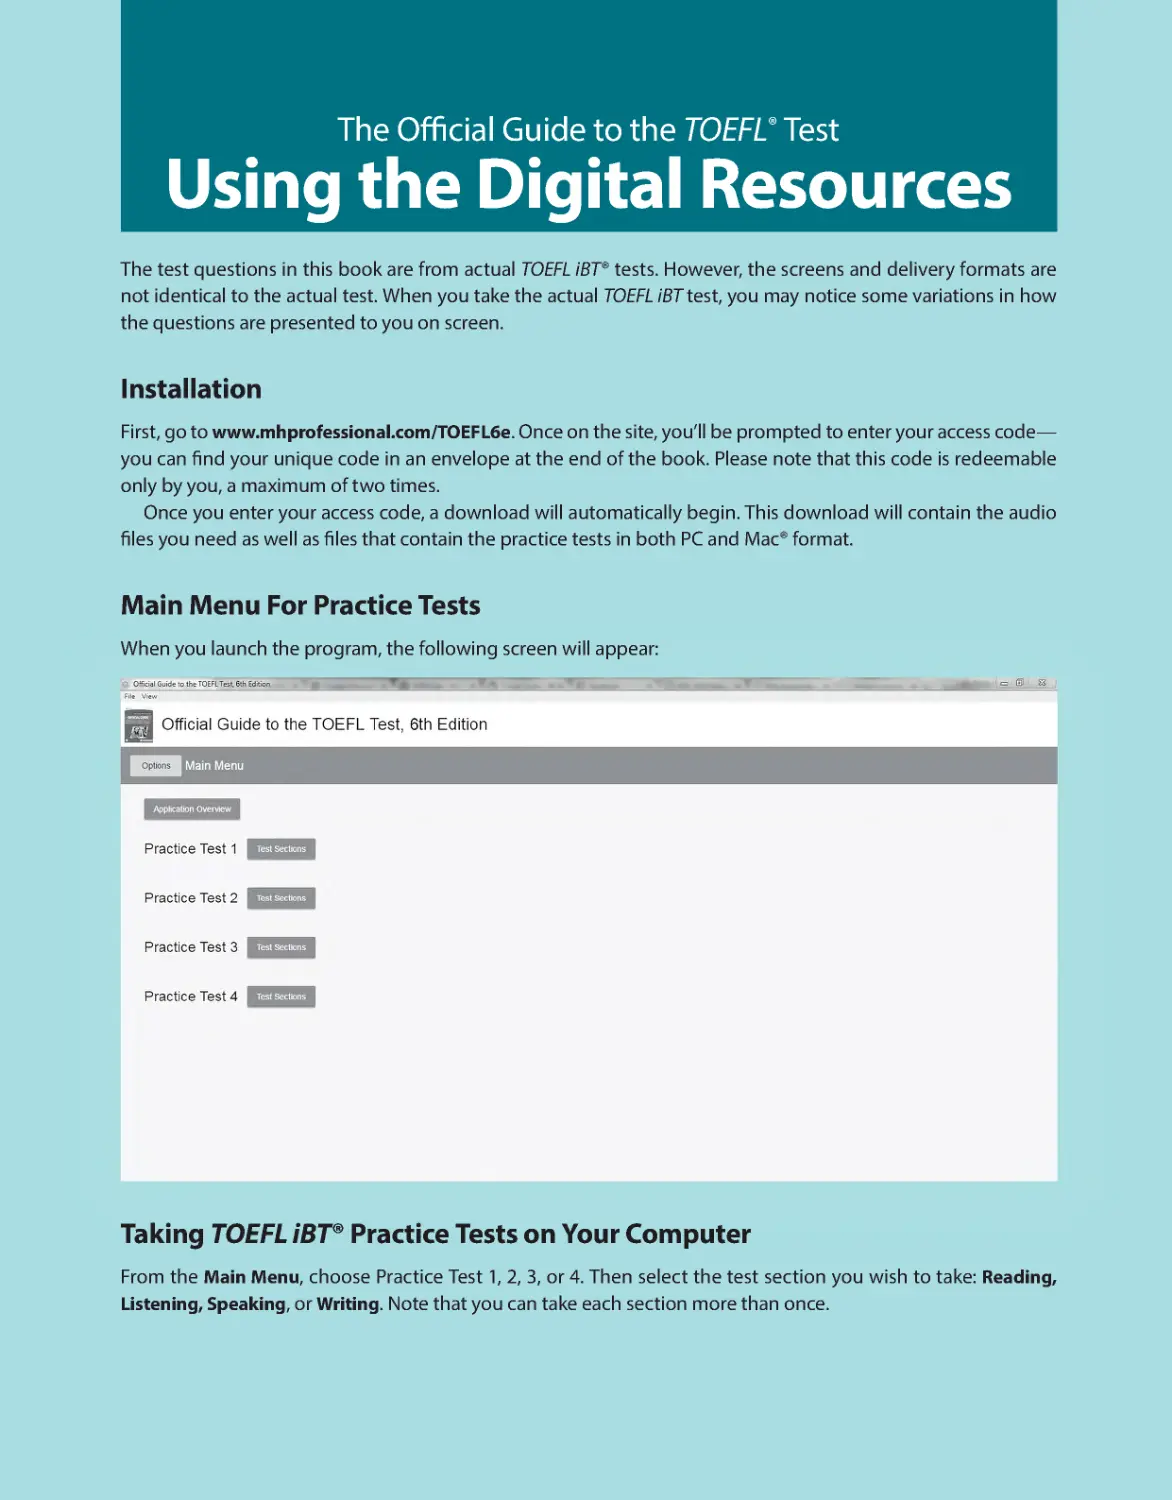 The Official Guide to the TOEFL® Test Using the Digital Resources
Main Menu For Practice Tests
Taking TOEFL iBT® Practice Tests on Your Computer